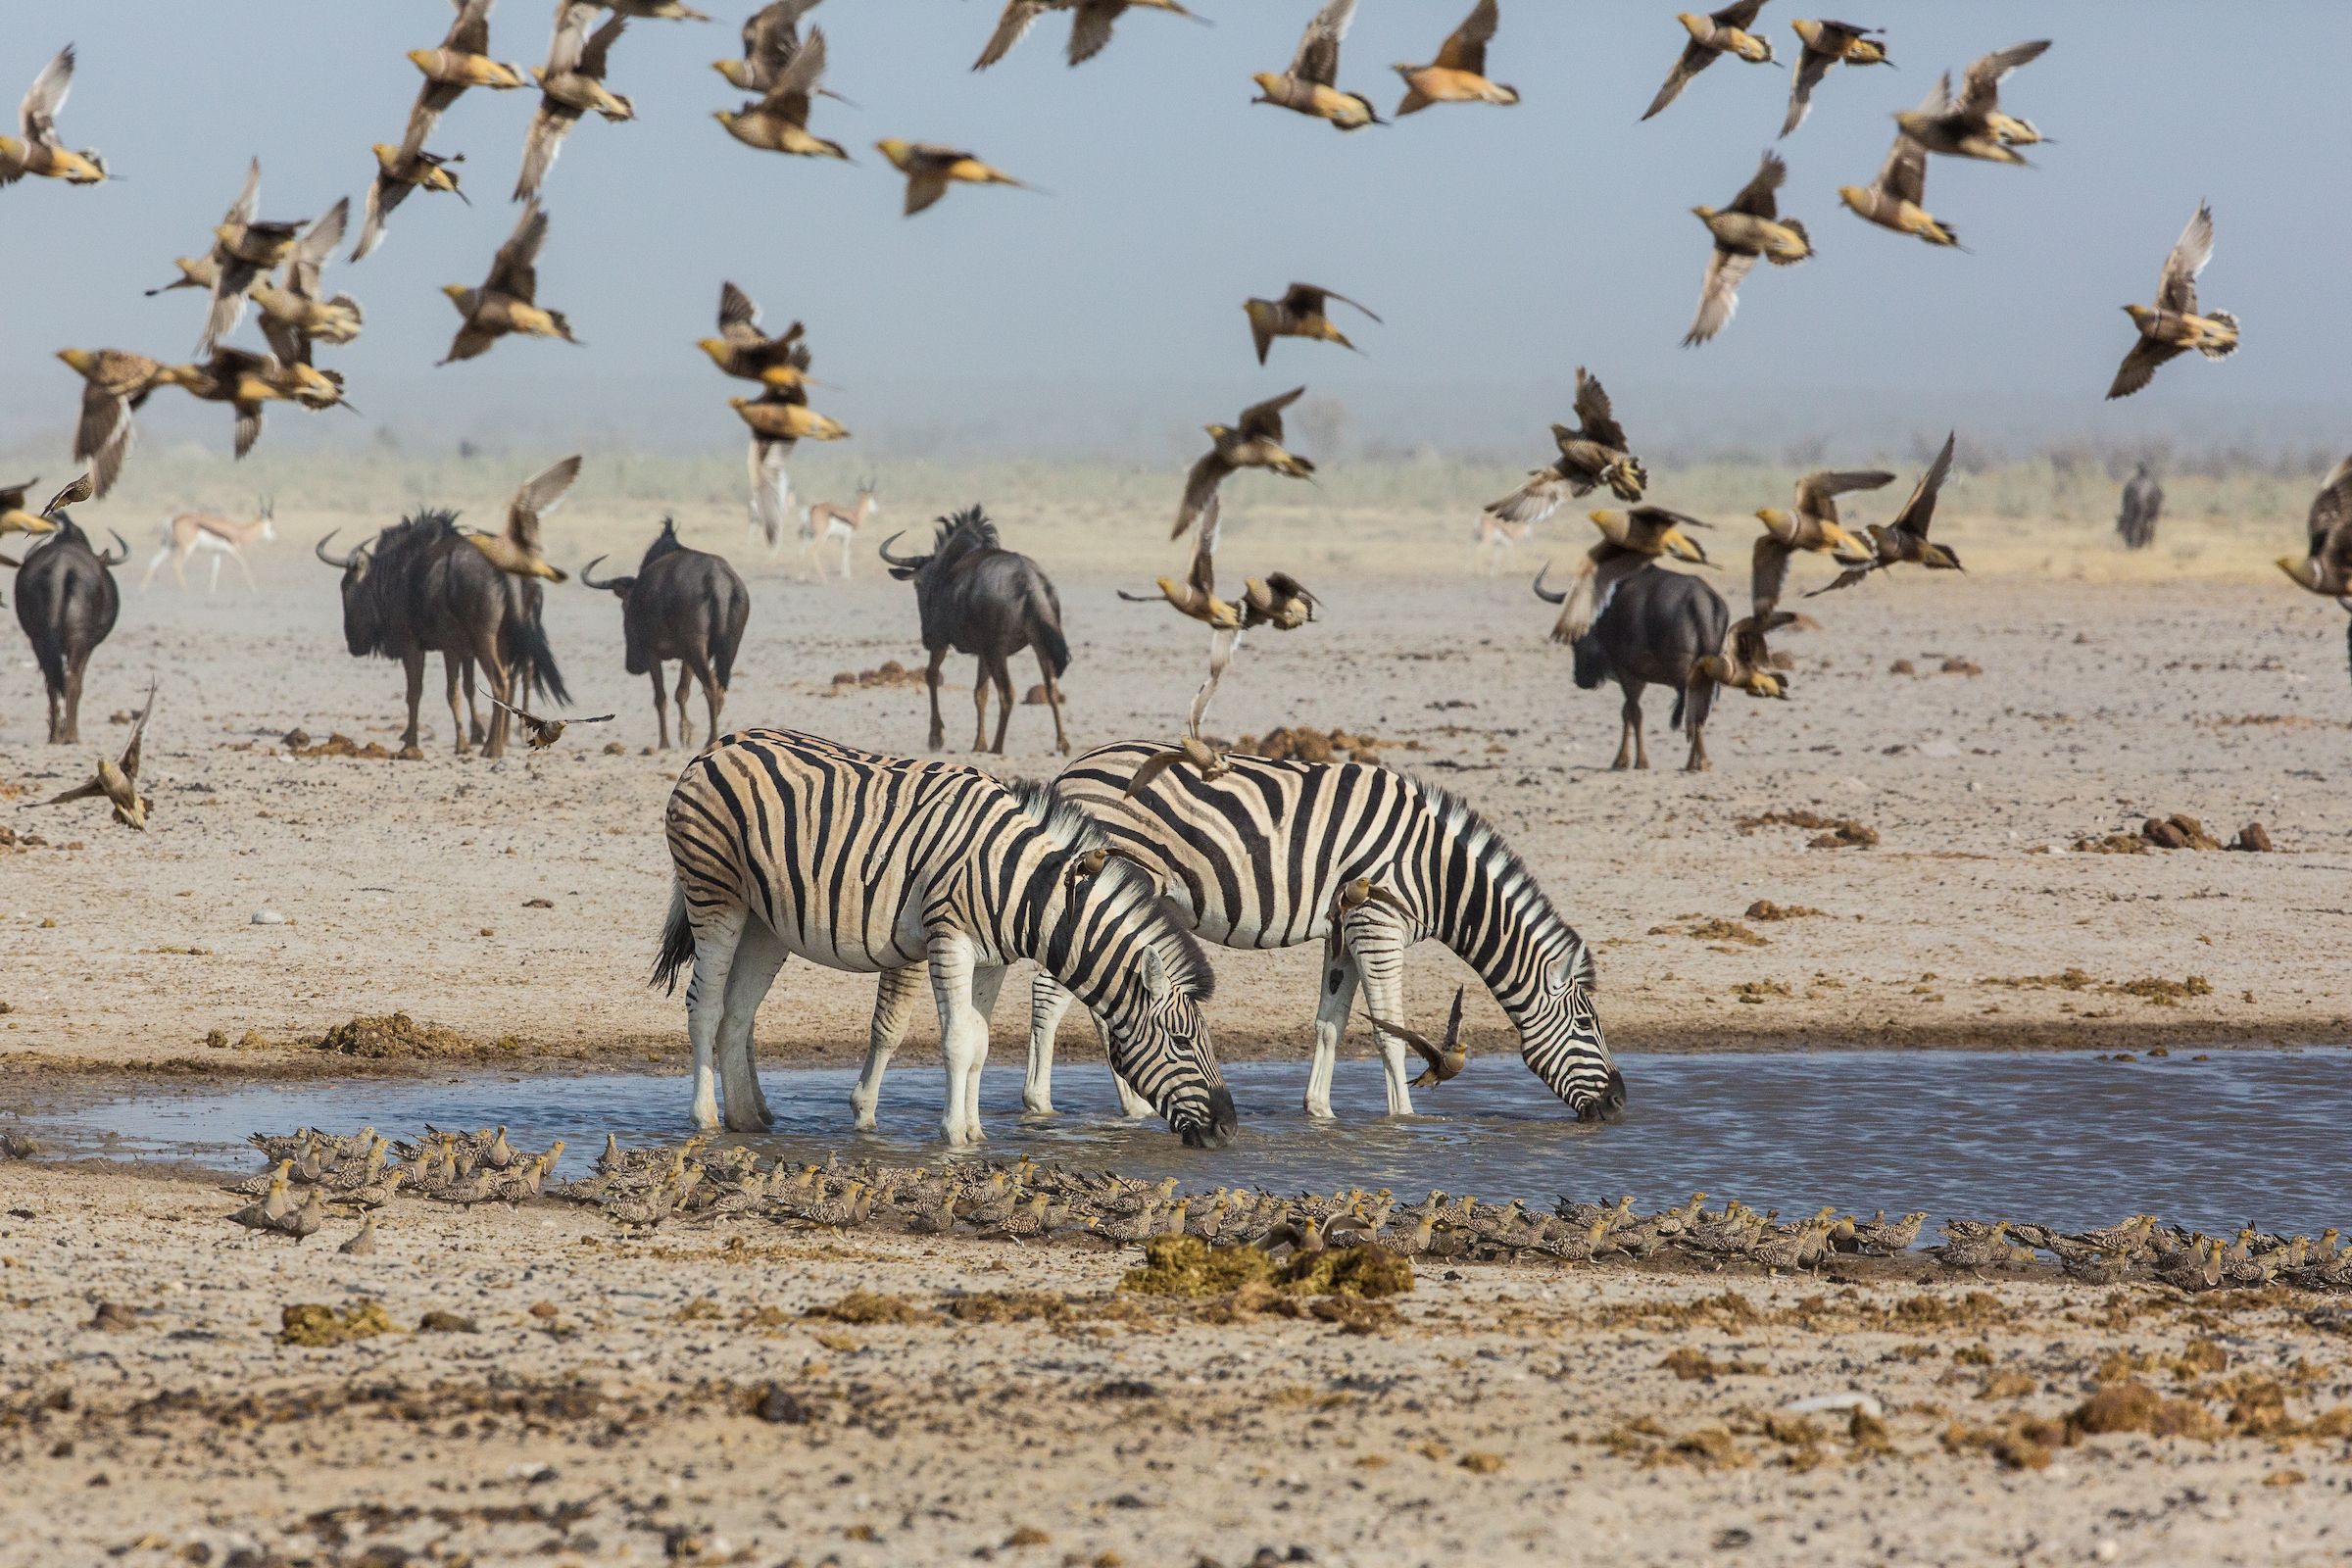 Two Burchell's Zebras drinking at a water hole surrounded by a flock of Sand Grouse in Etosha